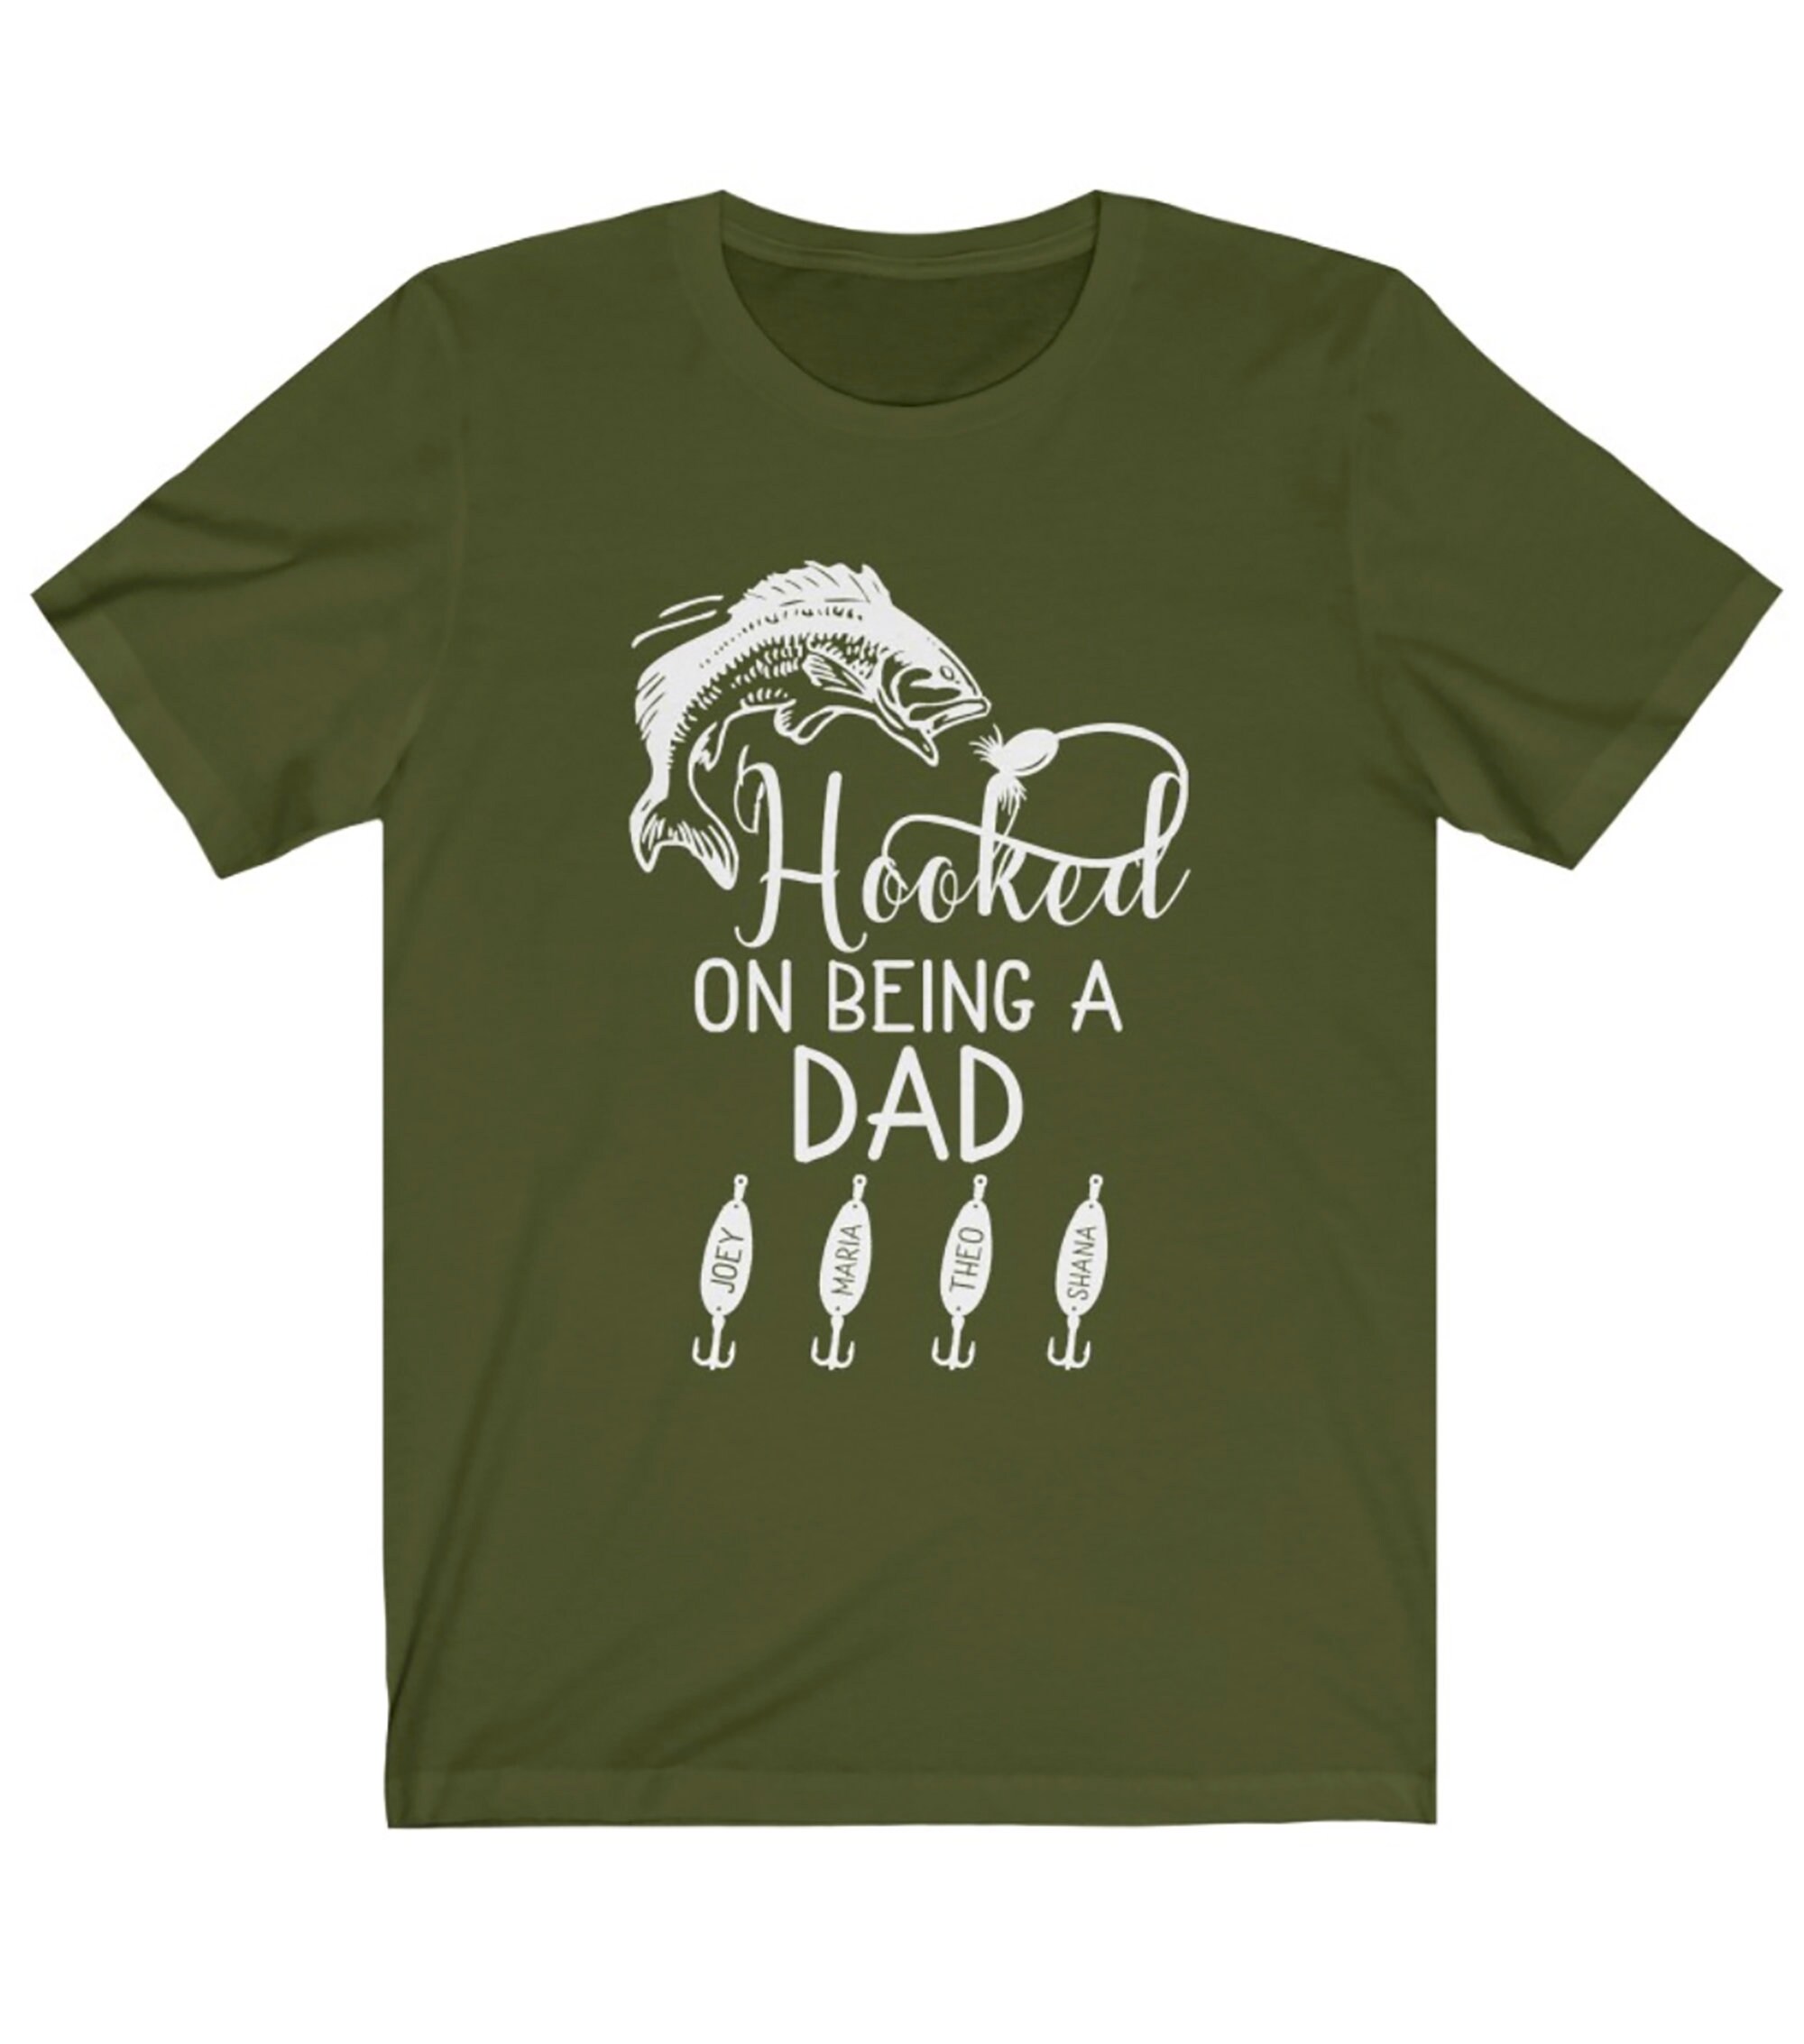 Hooked on Dad Shirt, Father Fishing Rod Tee, Personalized Shirt, Custom  Fishing Pole With Name 